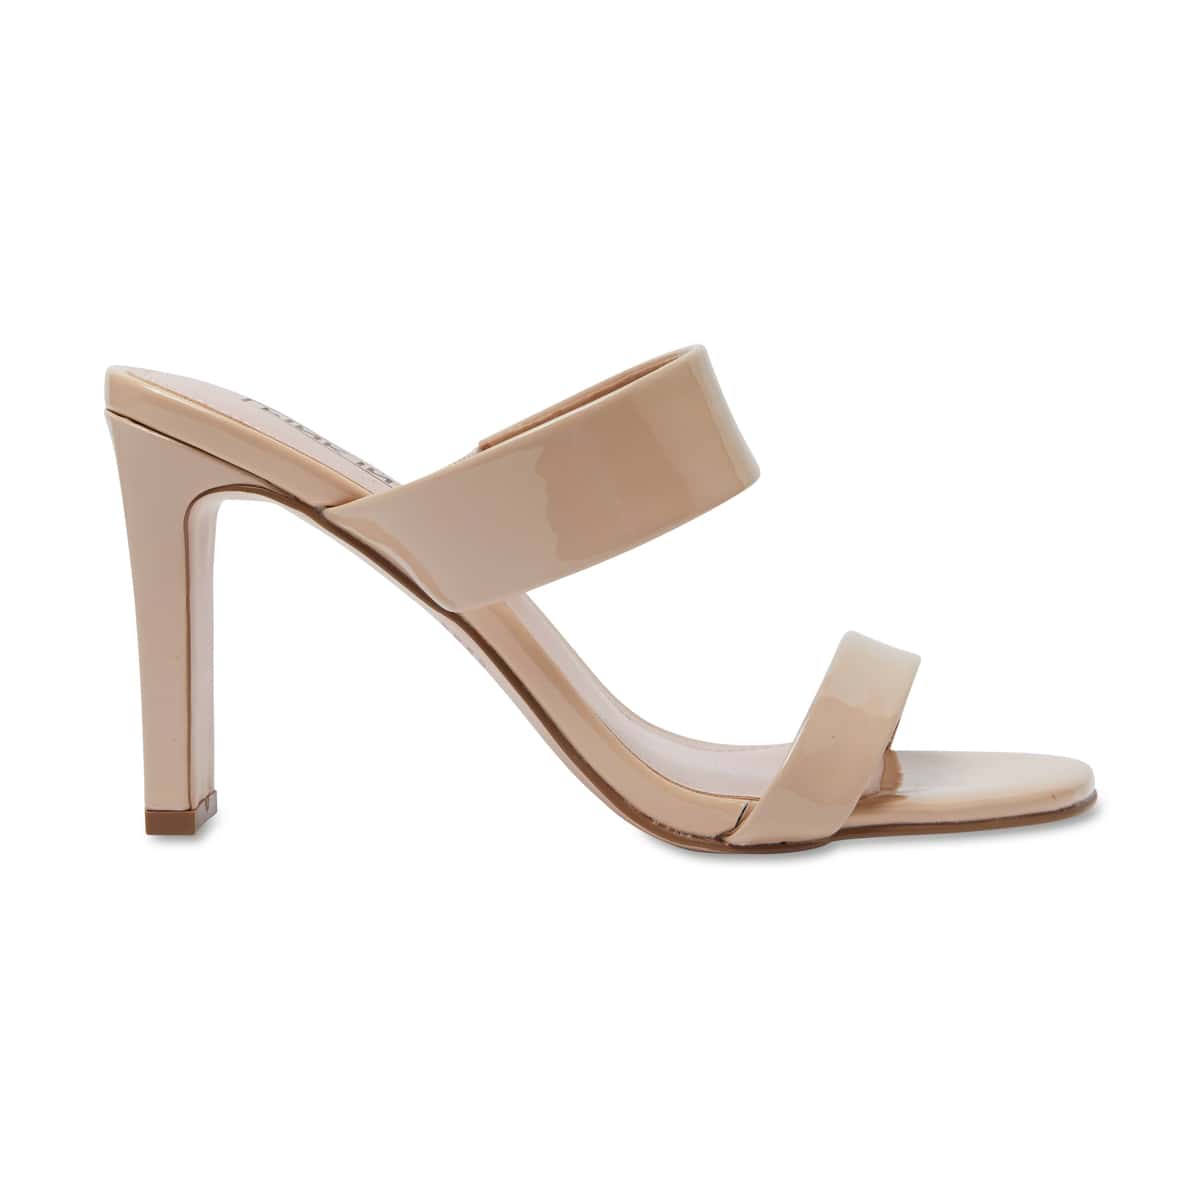 Tempo Heel in Nude Patent